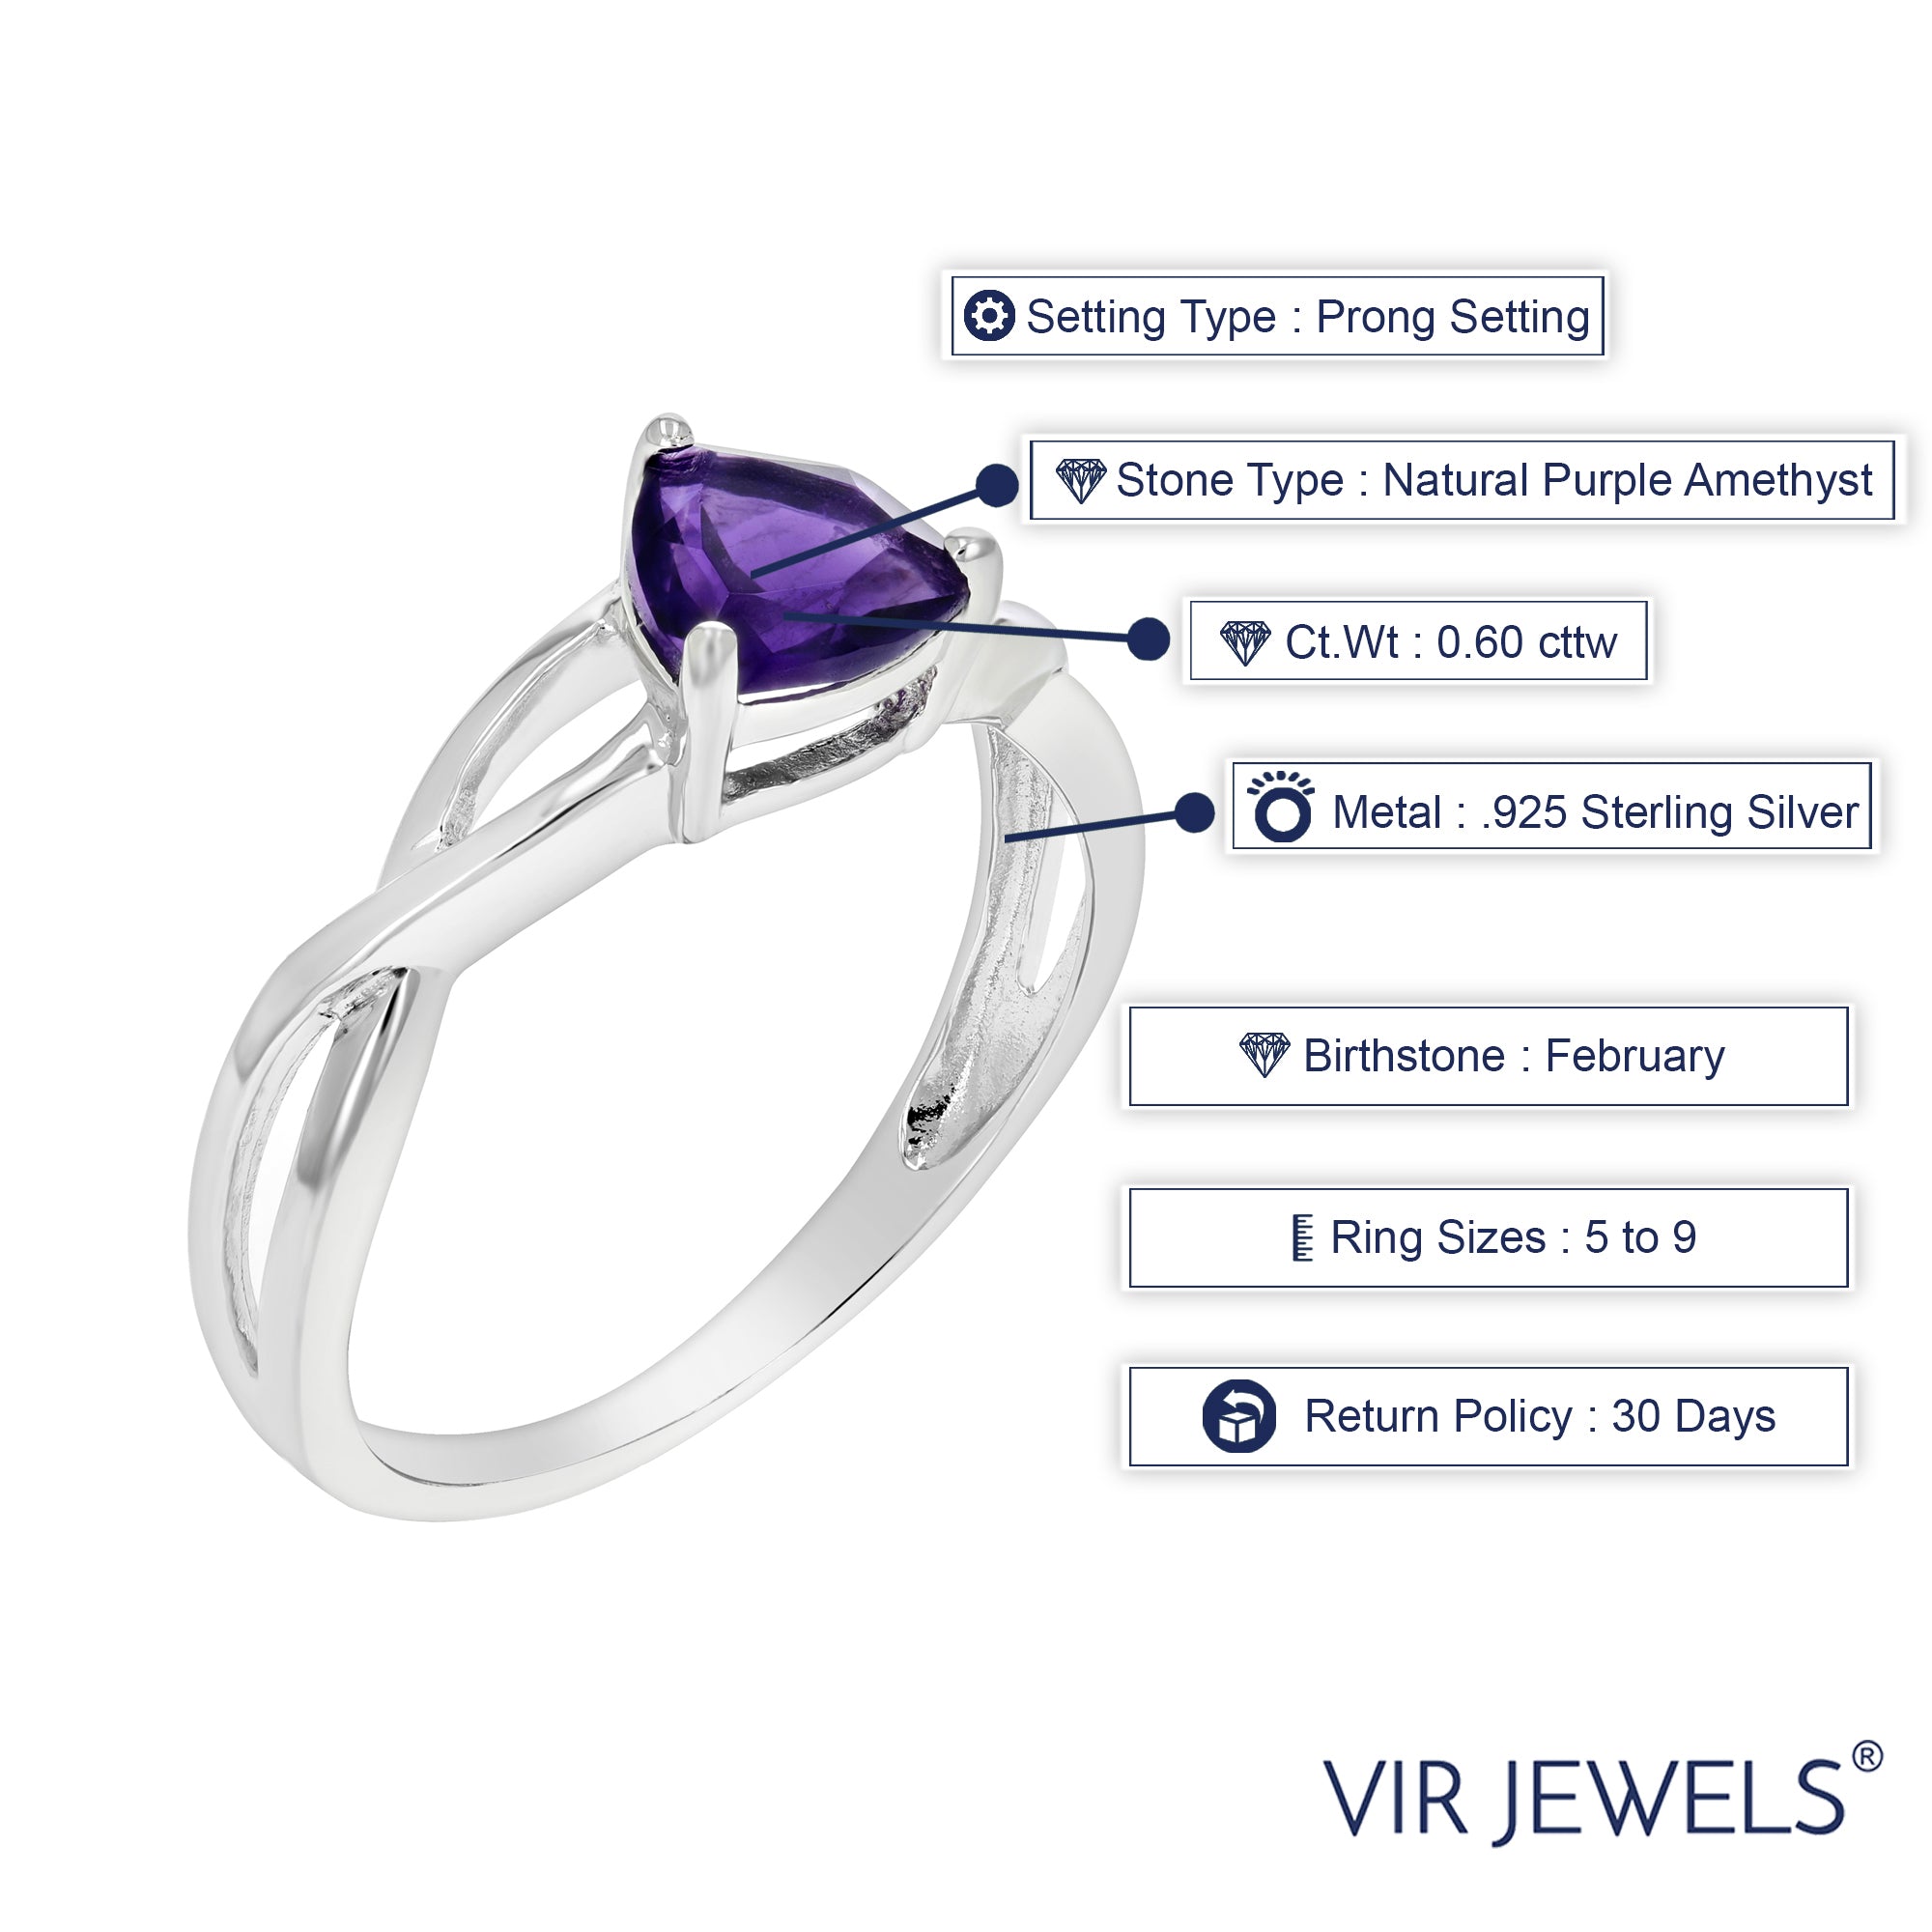 0.60 cttw Purple Amethyst Ring .925 Sterling Silver with Rhodium Triangle 6 MM